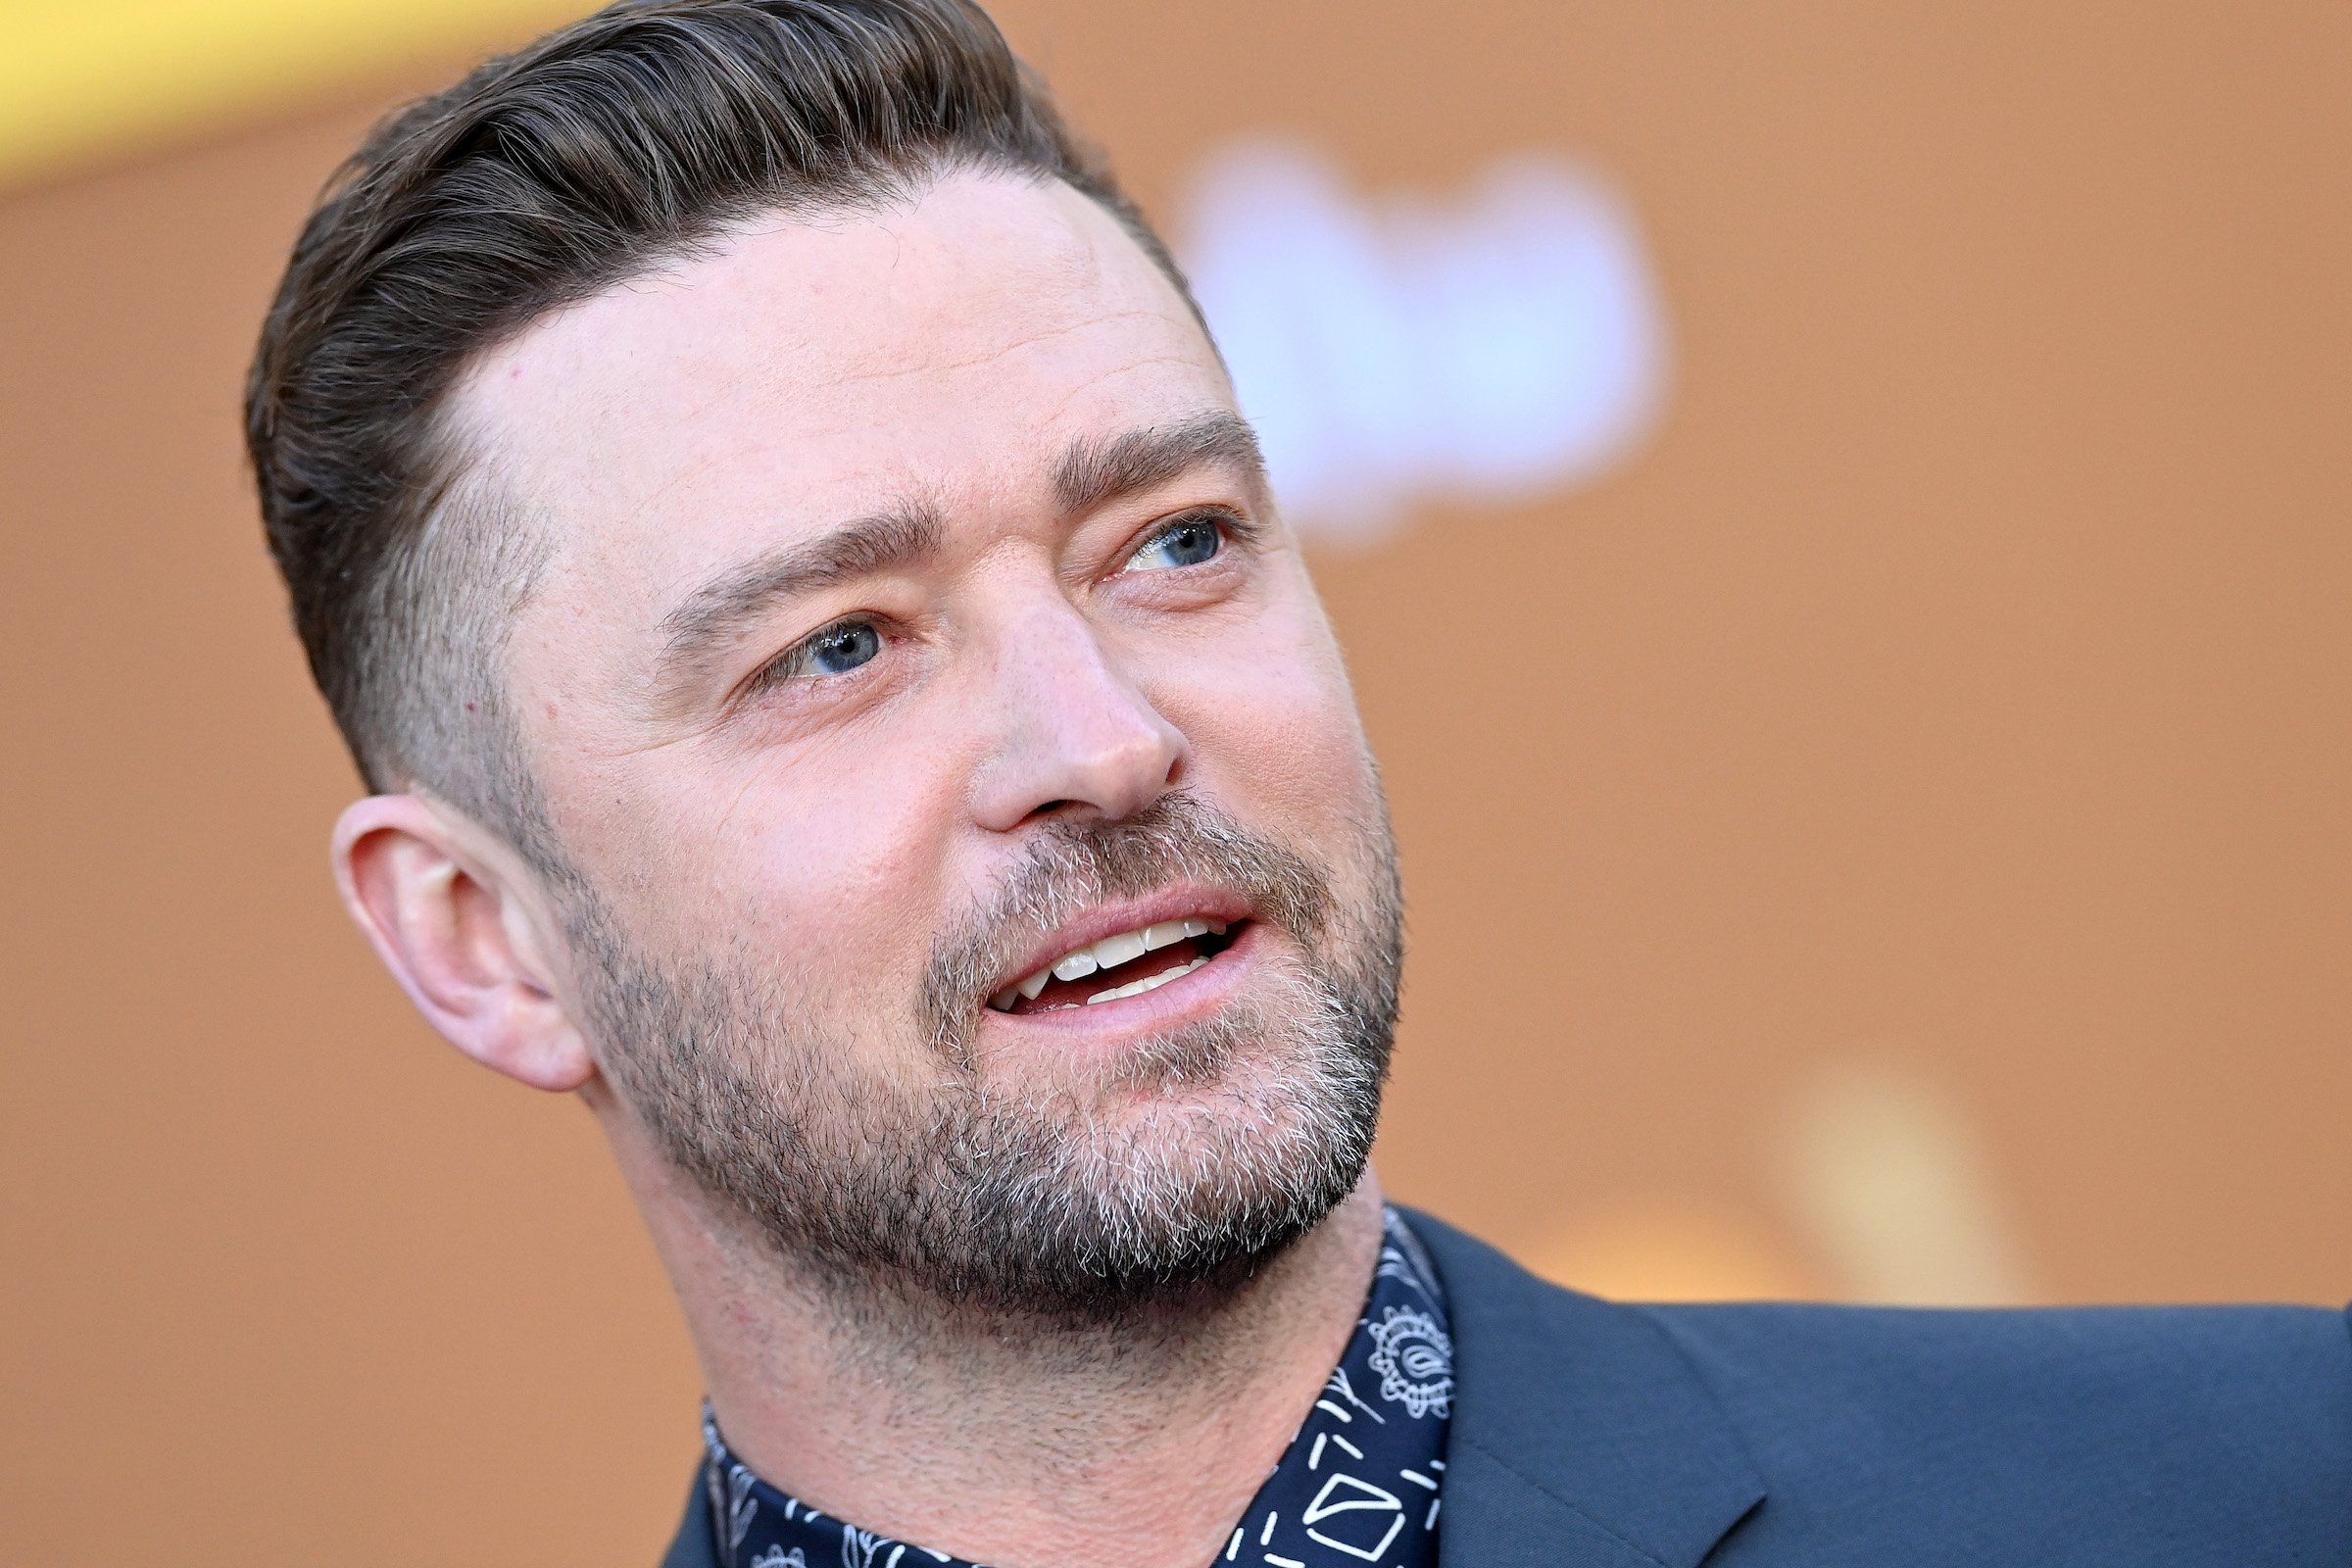 Justin Timberlake’s Net Worth After the Sale of His Massive Music Catalog